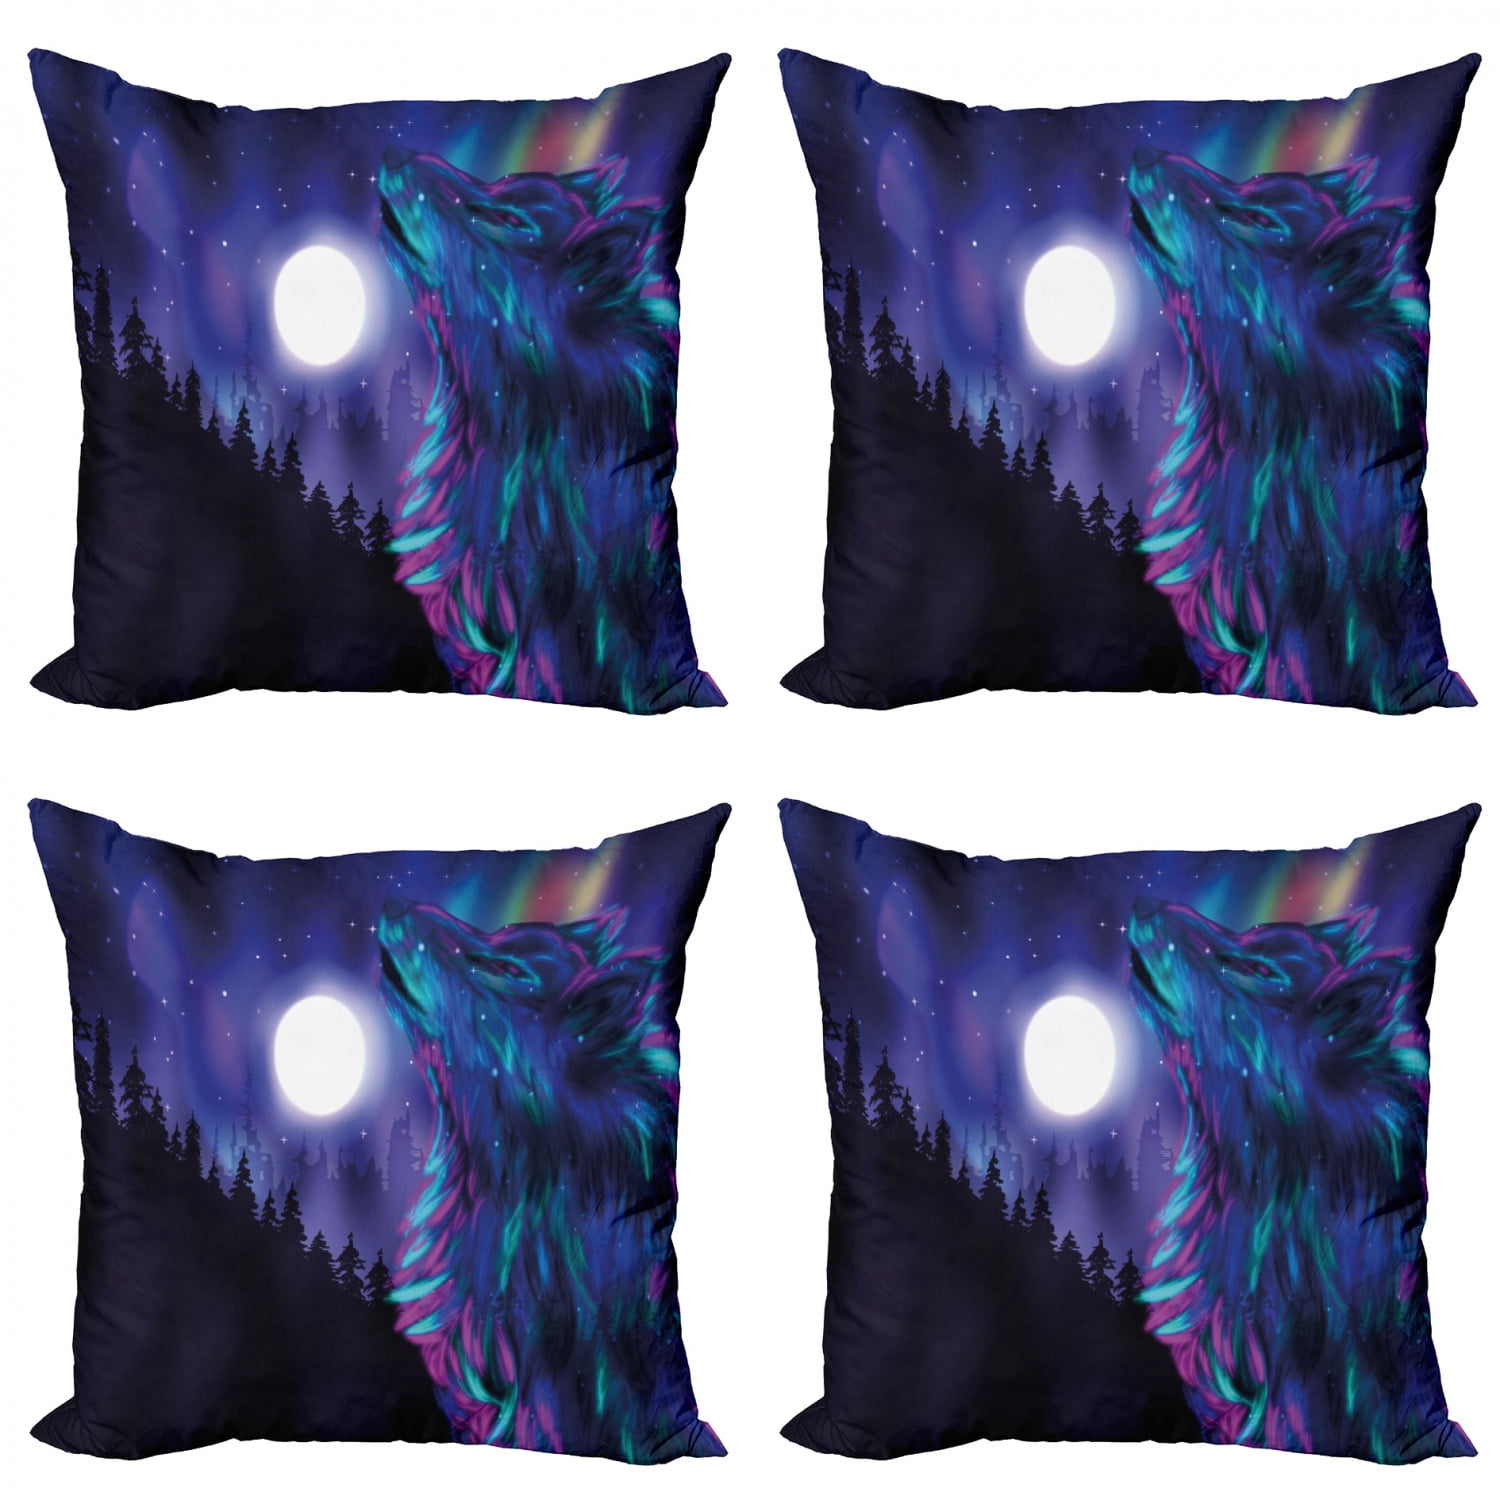 Pillow Decorative Throw Starry Forest 